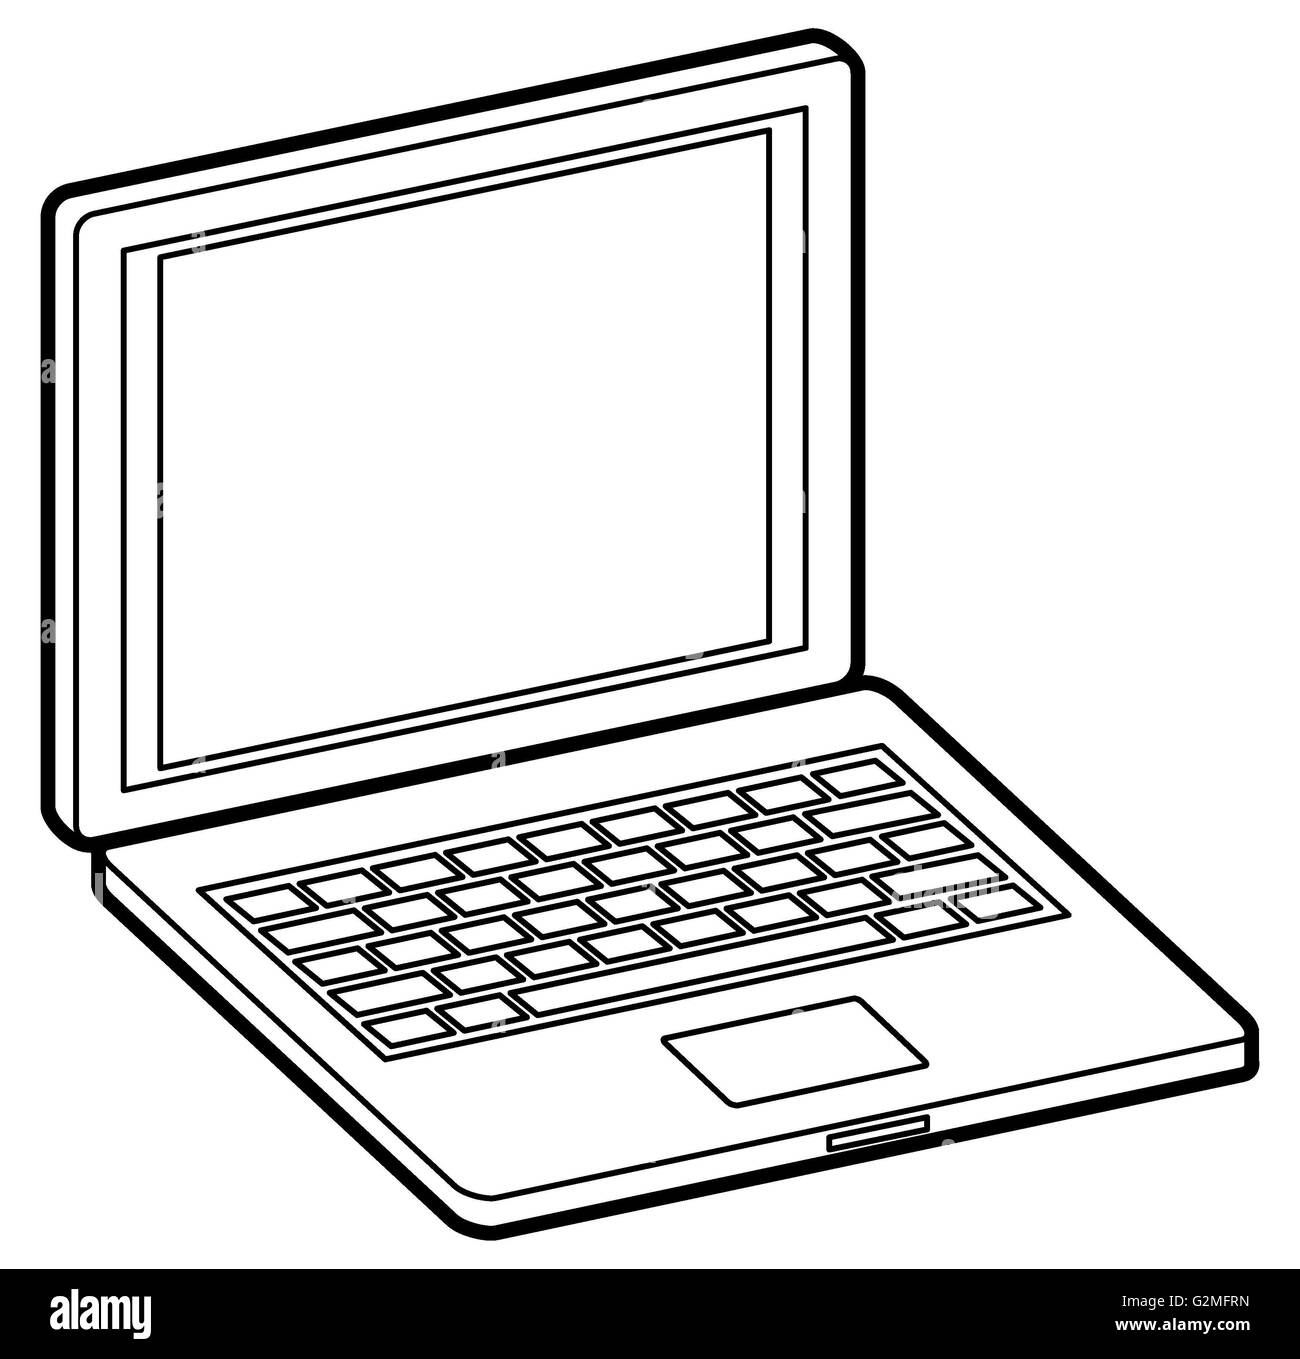 Laptop with blank screen Stock Photo